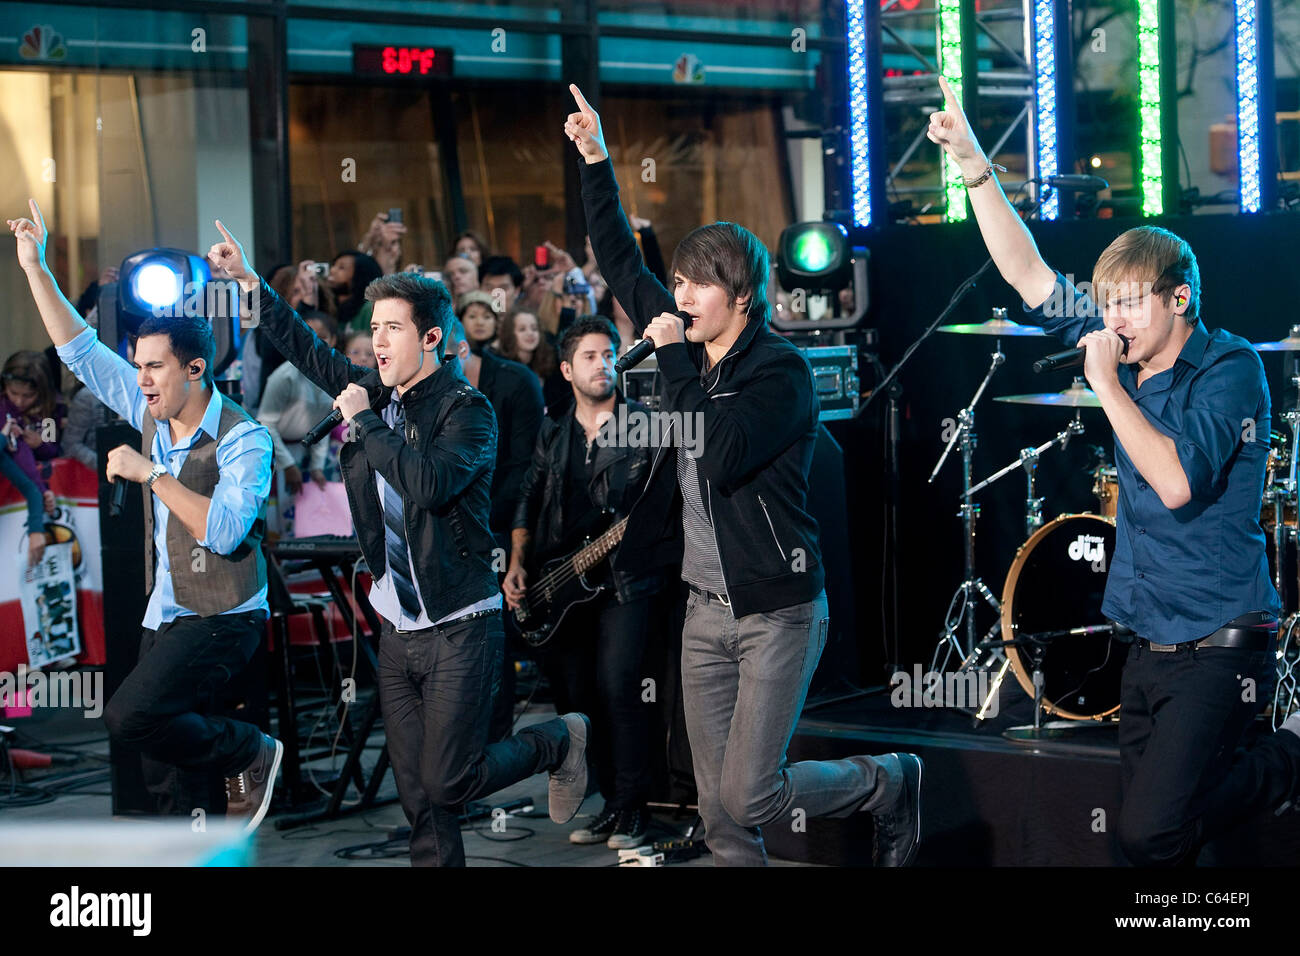 Big Time Rush, Carlos Pena,Kendall Schmidt, James Maslow, Kendall Schmidt on stage for NBC TODAY Show Concert Series with Big Time Rush, Rockefeller Plaza, New York, NY October 11, 2010. Photo By: Lee/Everett Collection Stock Photo